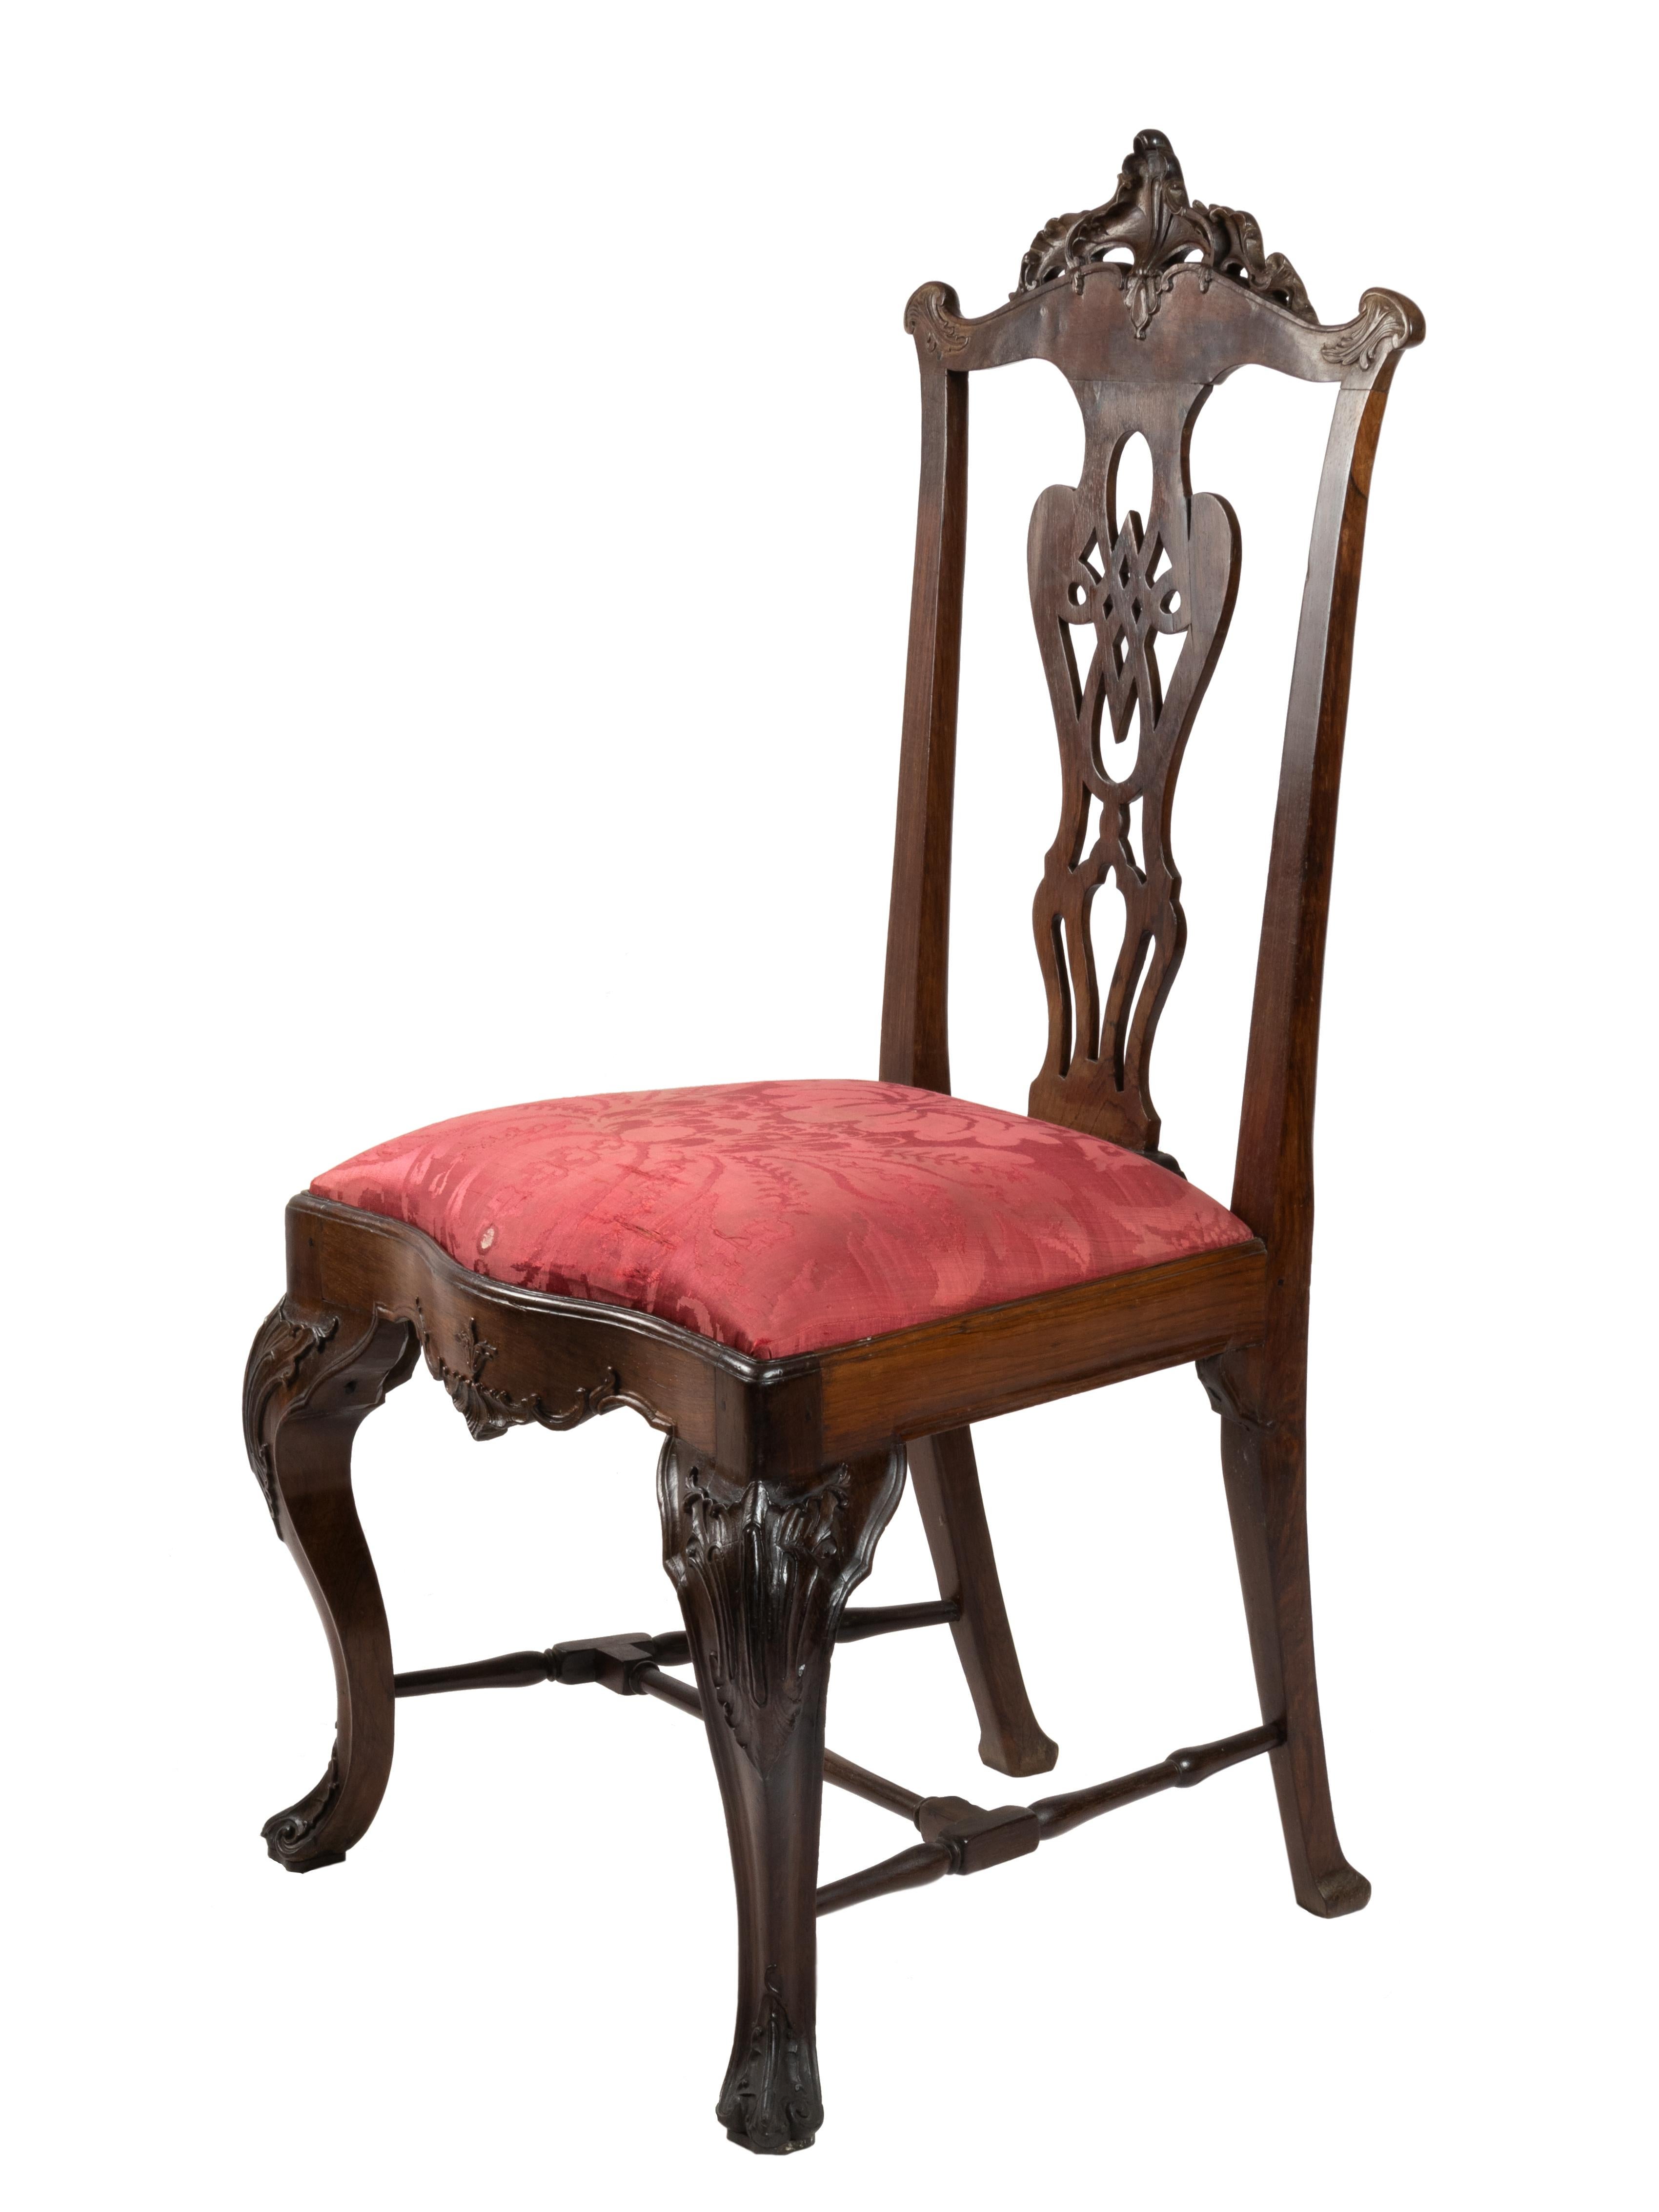 A tall and imponent Baroque Períod chair with legs connected to each other by H-shaped crossbars, curved and counter-curved legs and high carved in rosewood where the counter-curved lines are visible, with a movable cushion with a grid upholstered